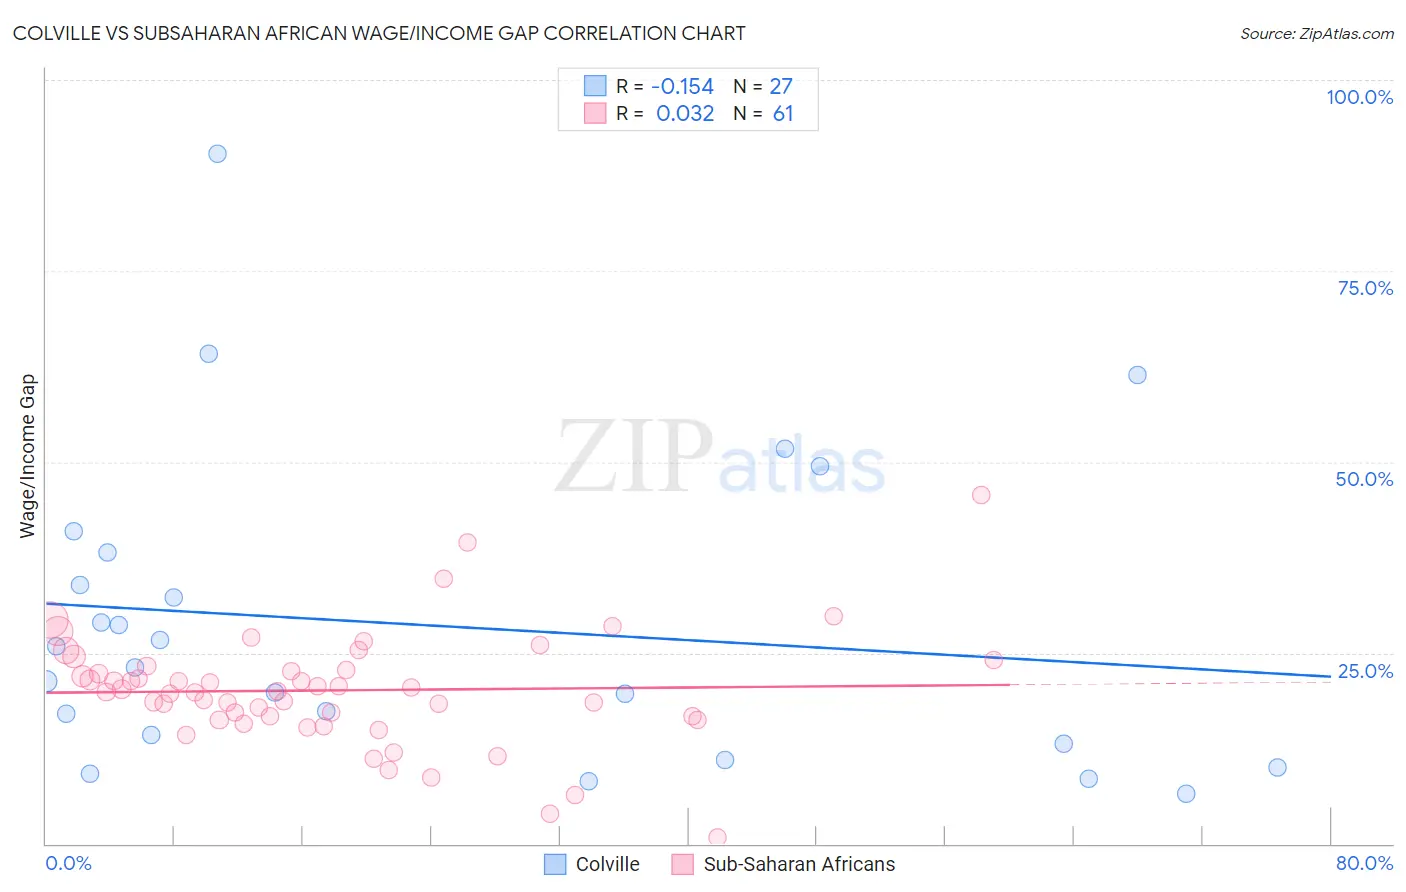 Colville vs Subsaharan African Wage/Income Gap